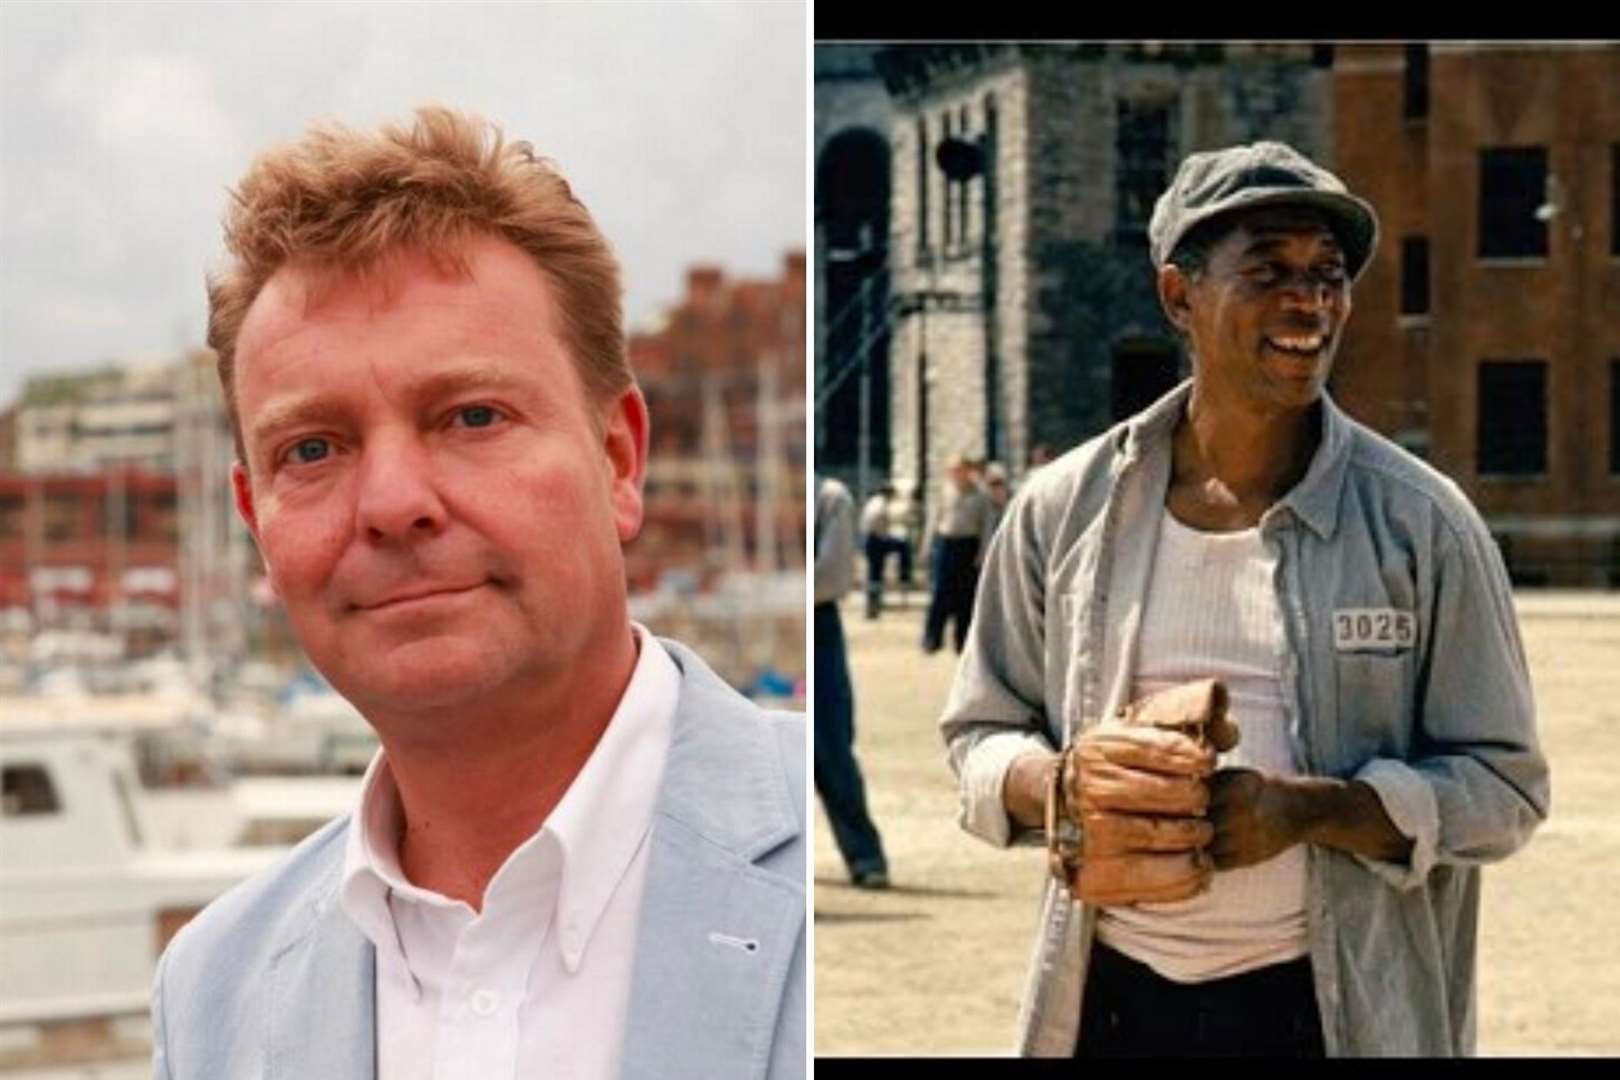 South Thanet MP Craig Mackinlay: The Shawshank Redemption (1994)